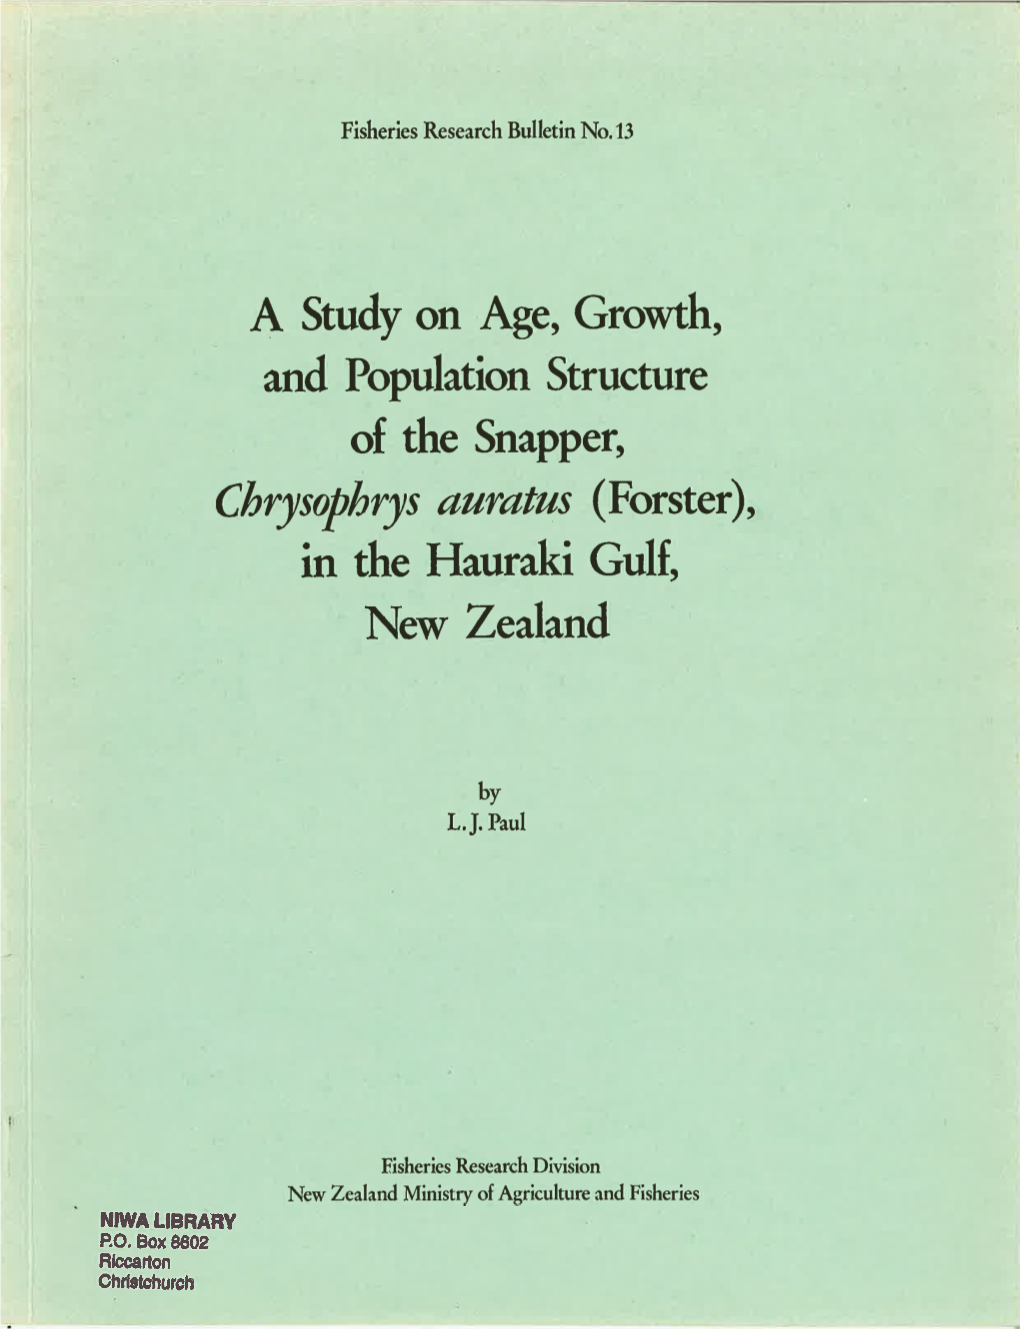 A Study on Ag., Growth, and Population Structure of the Snapper, Cltrynphrys Øaratus (Forster), in the Hauraki Gulf, Lr[Ew Zealand